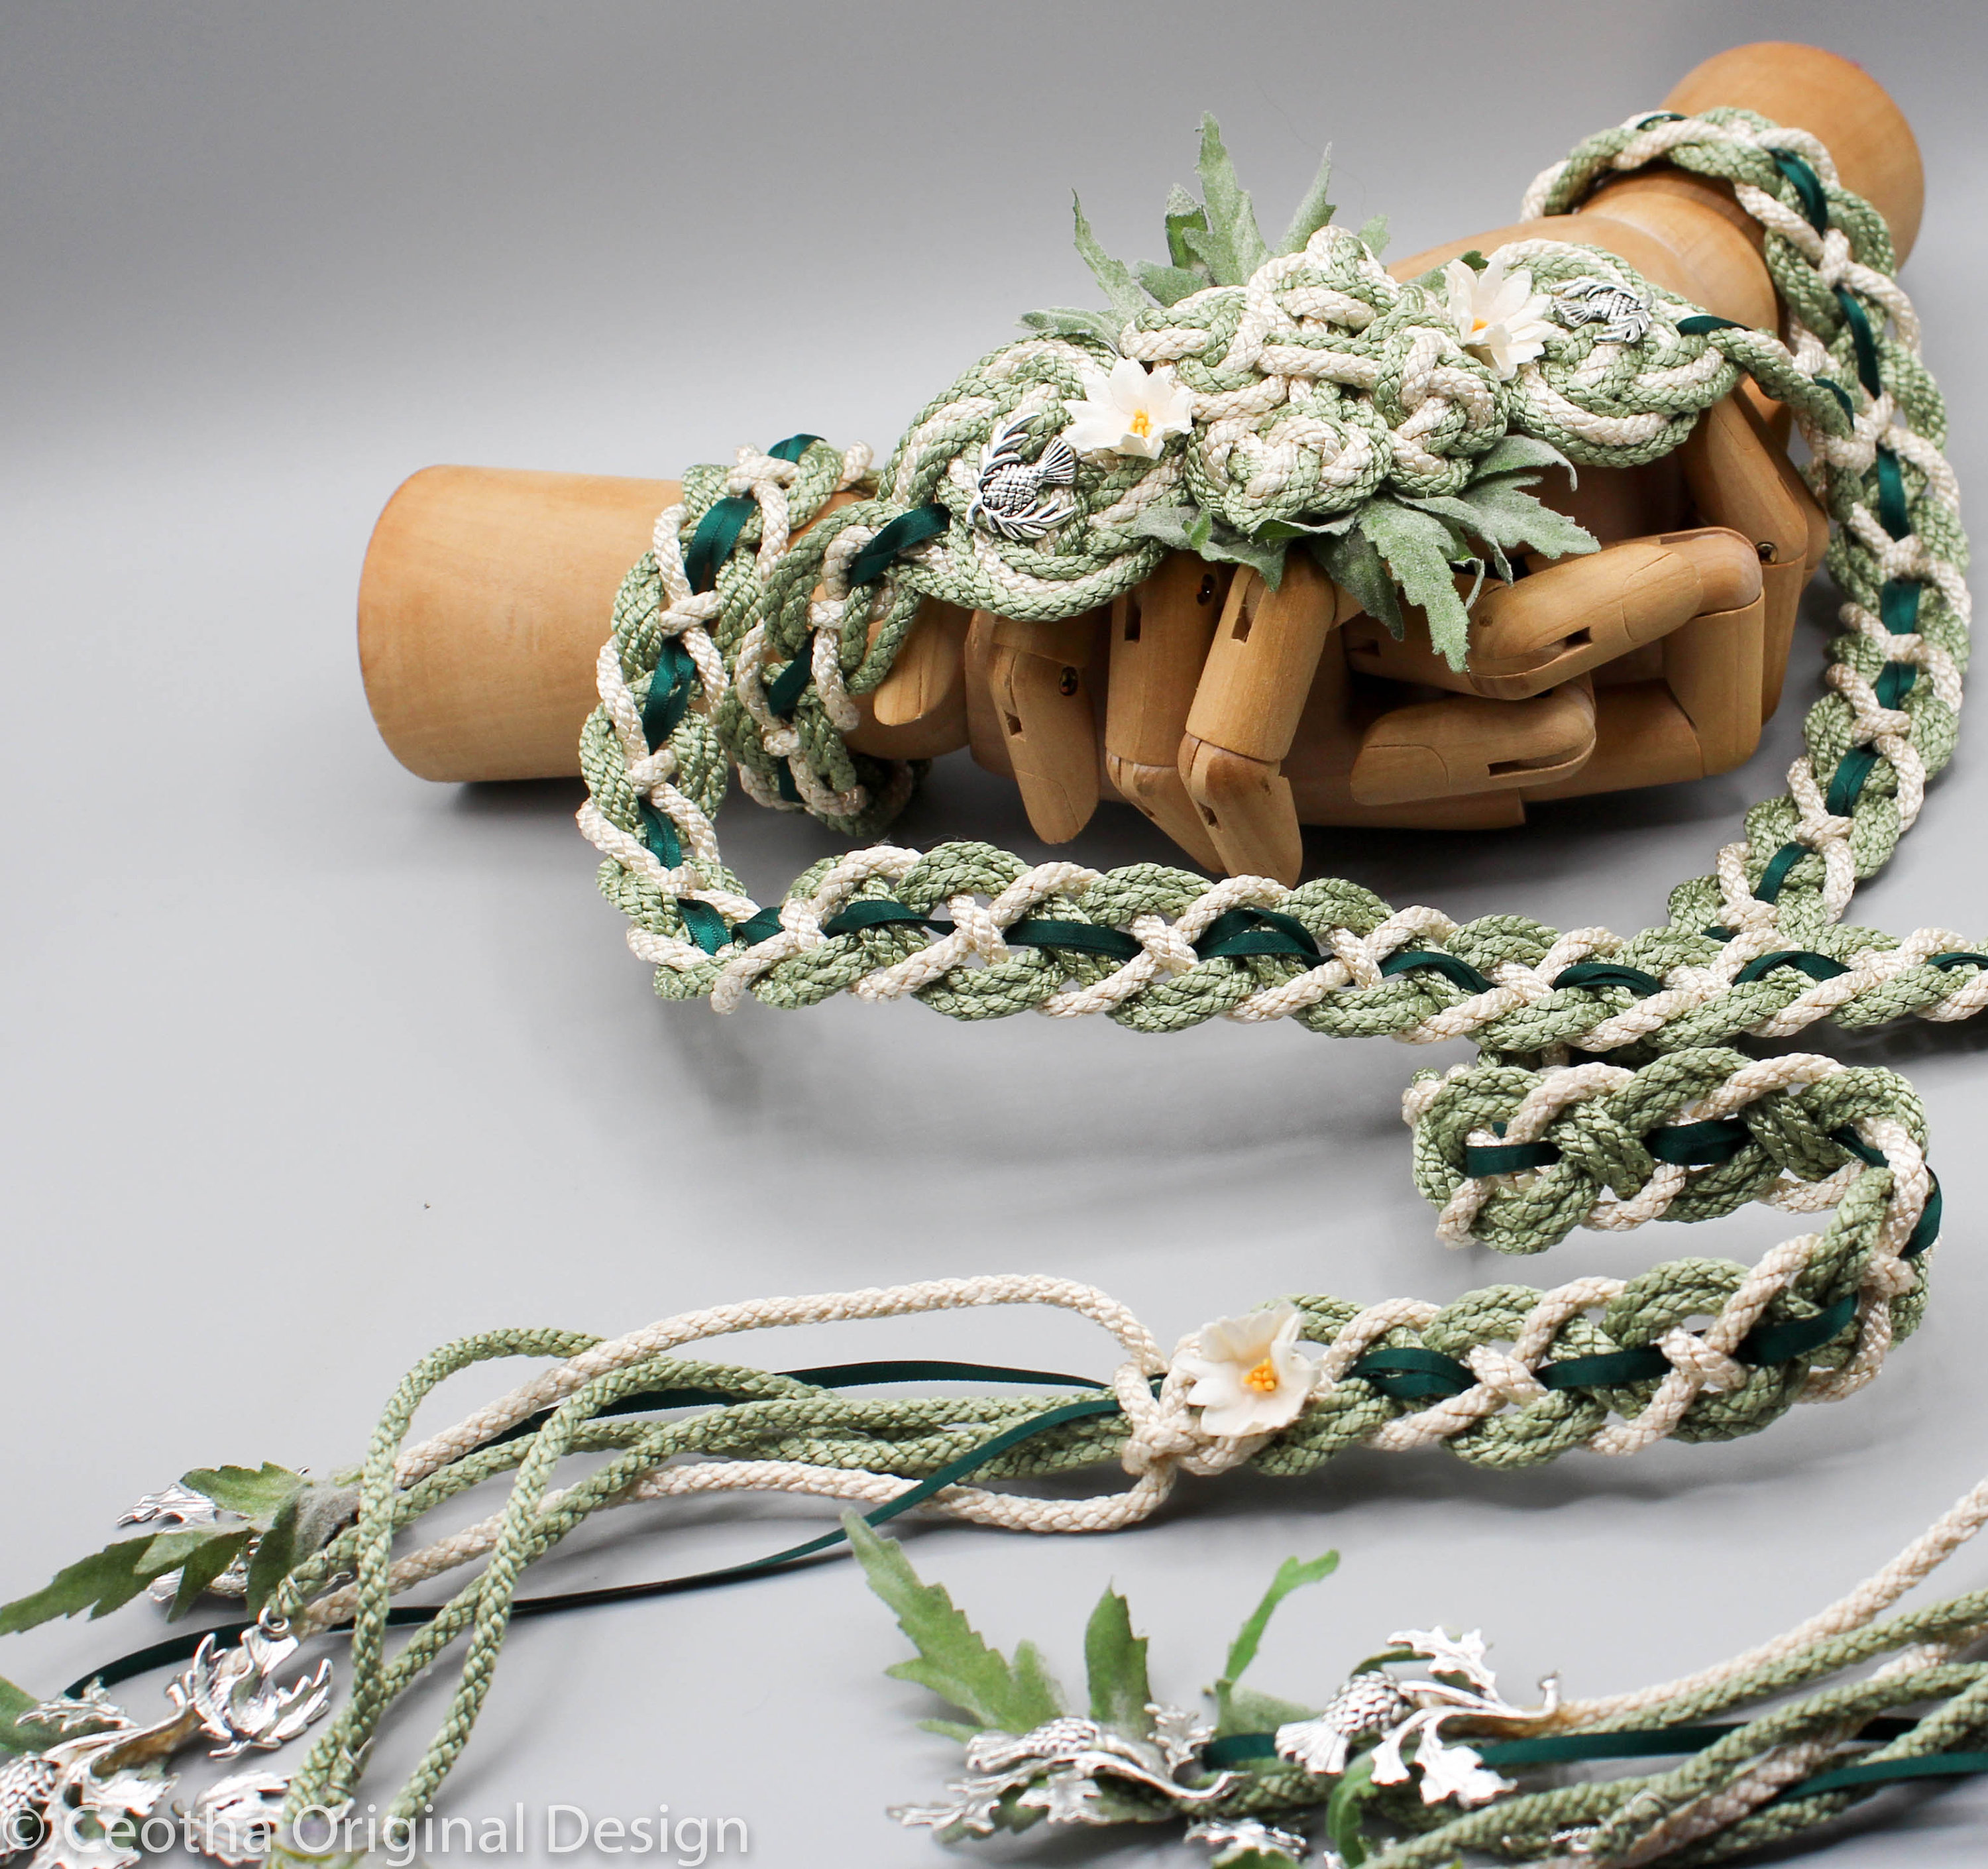 Custom Trinity Braid Handfasting Cord in Your Colors Option to